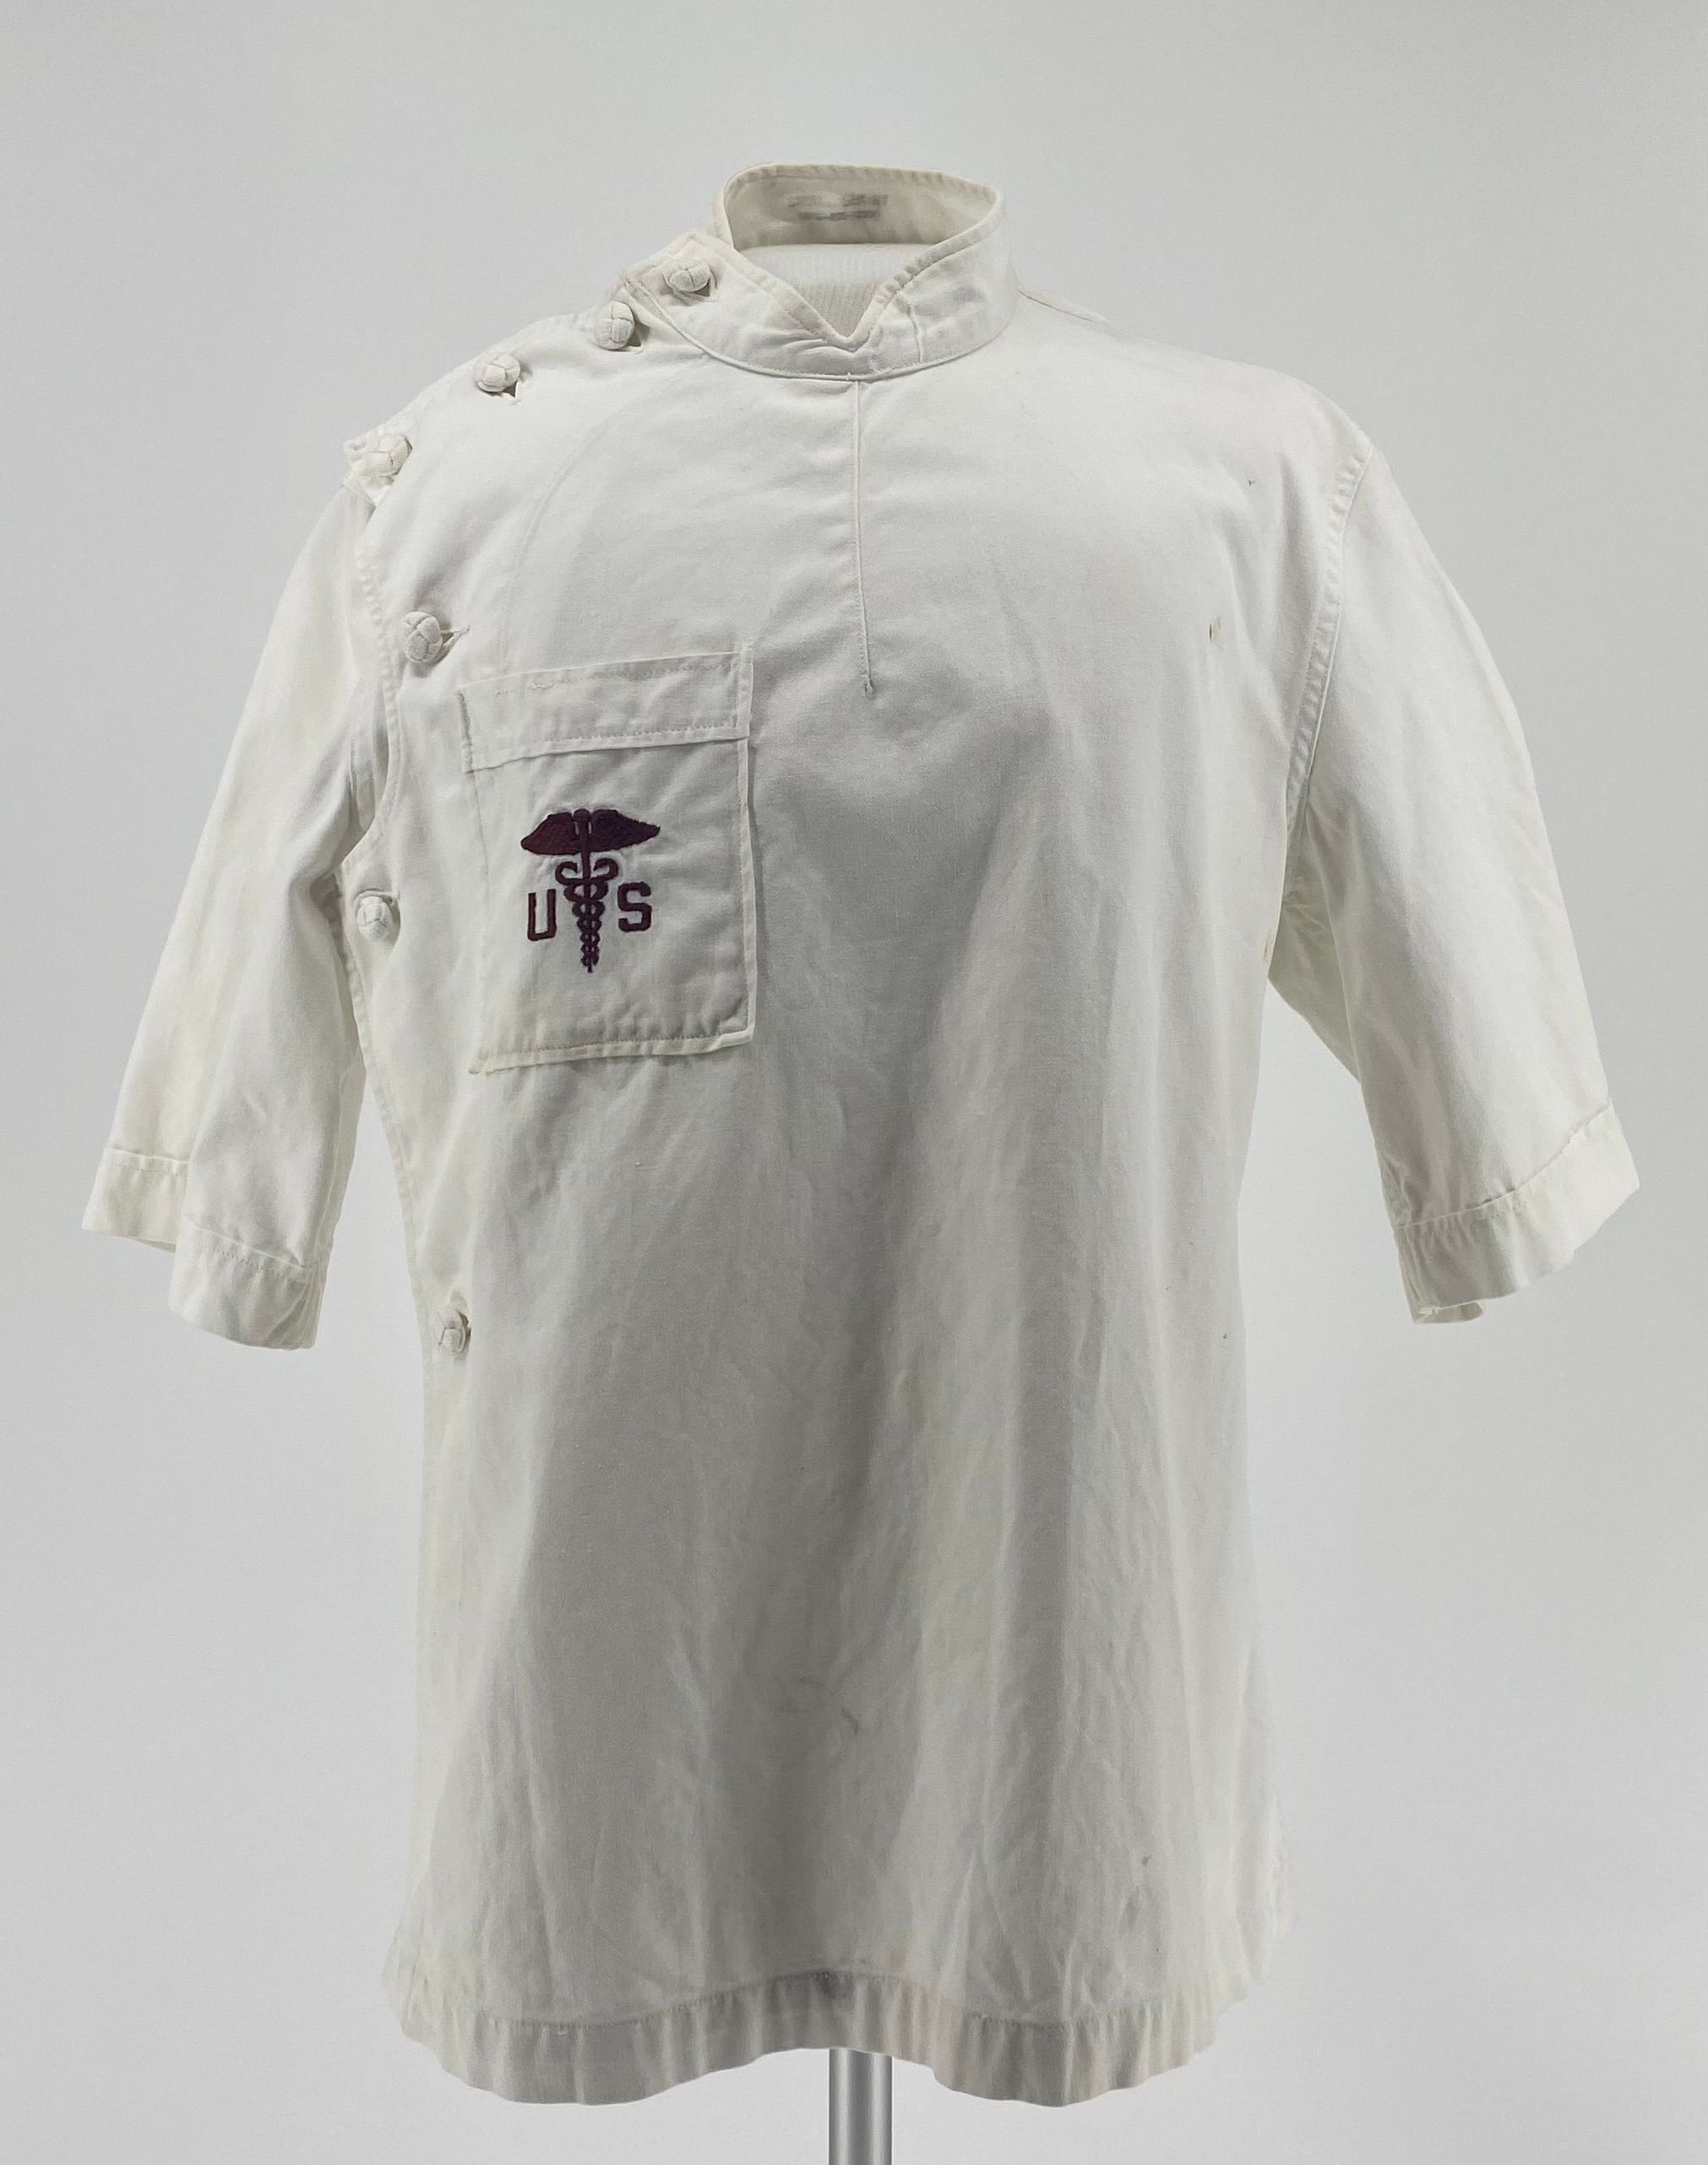 Primary Image of Medical Corpsman Smock